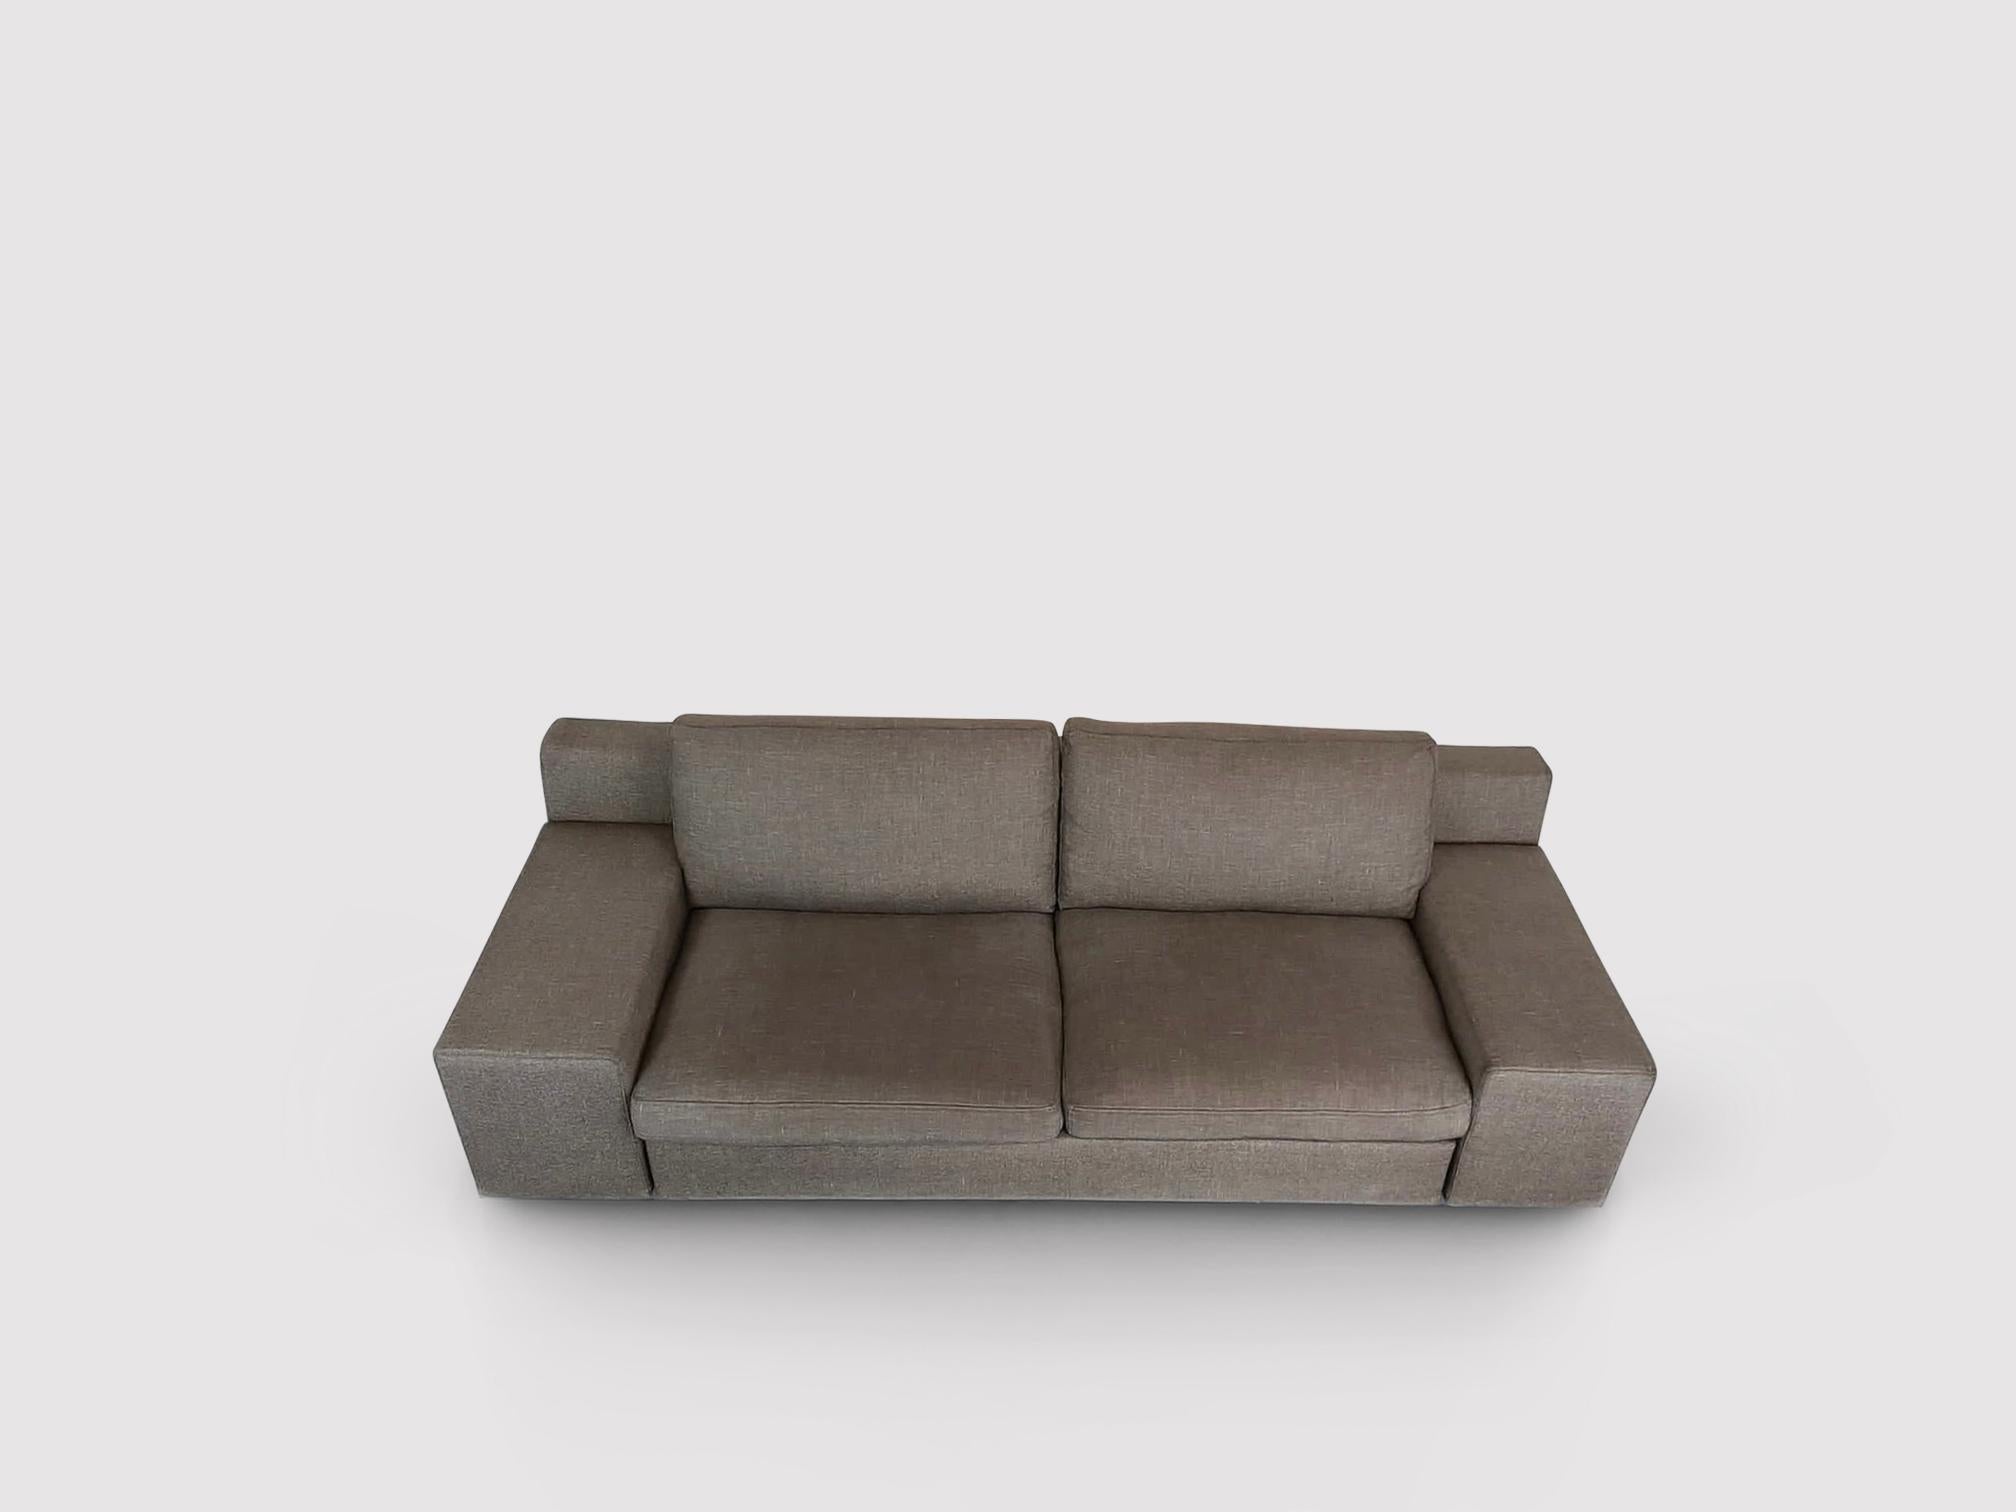 Modern Contemporary 235-236 Mister 2, 5 Seater Sofa by Philippe Starck for Cassina 2004